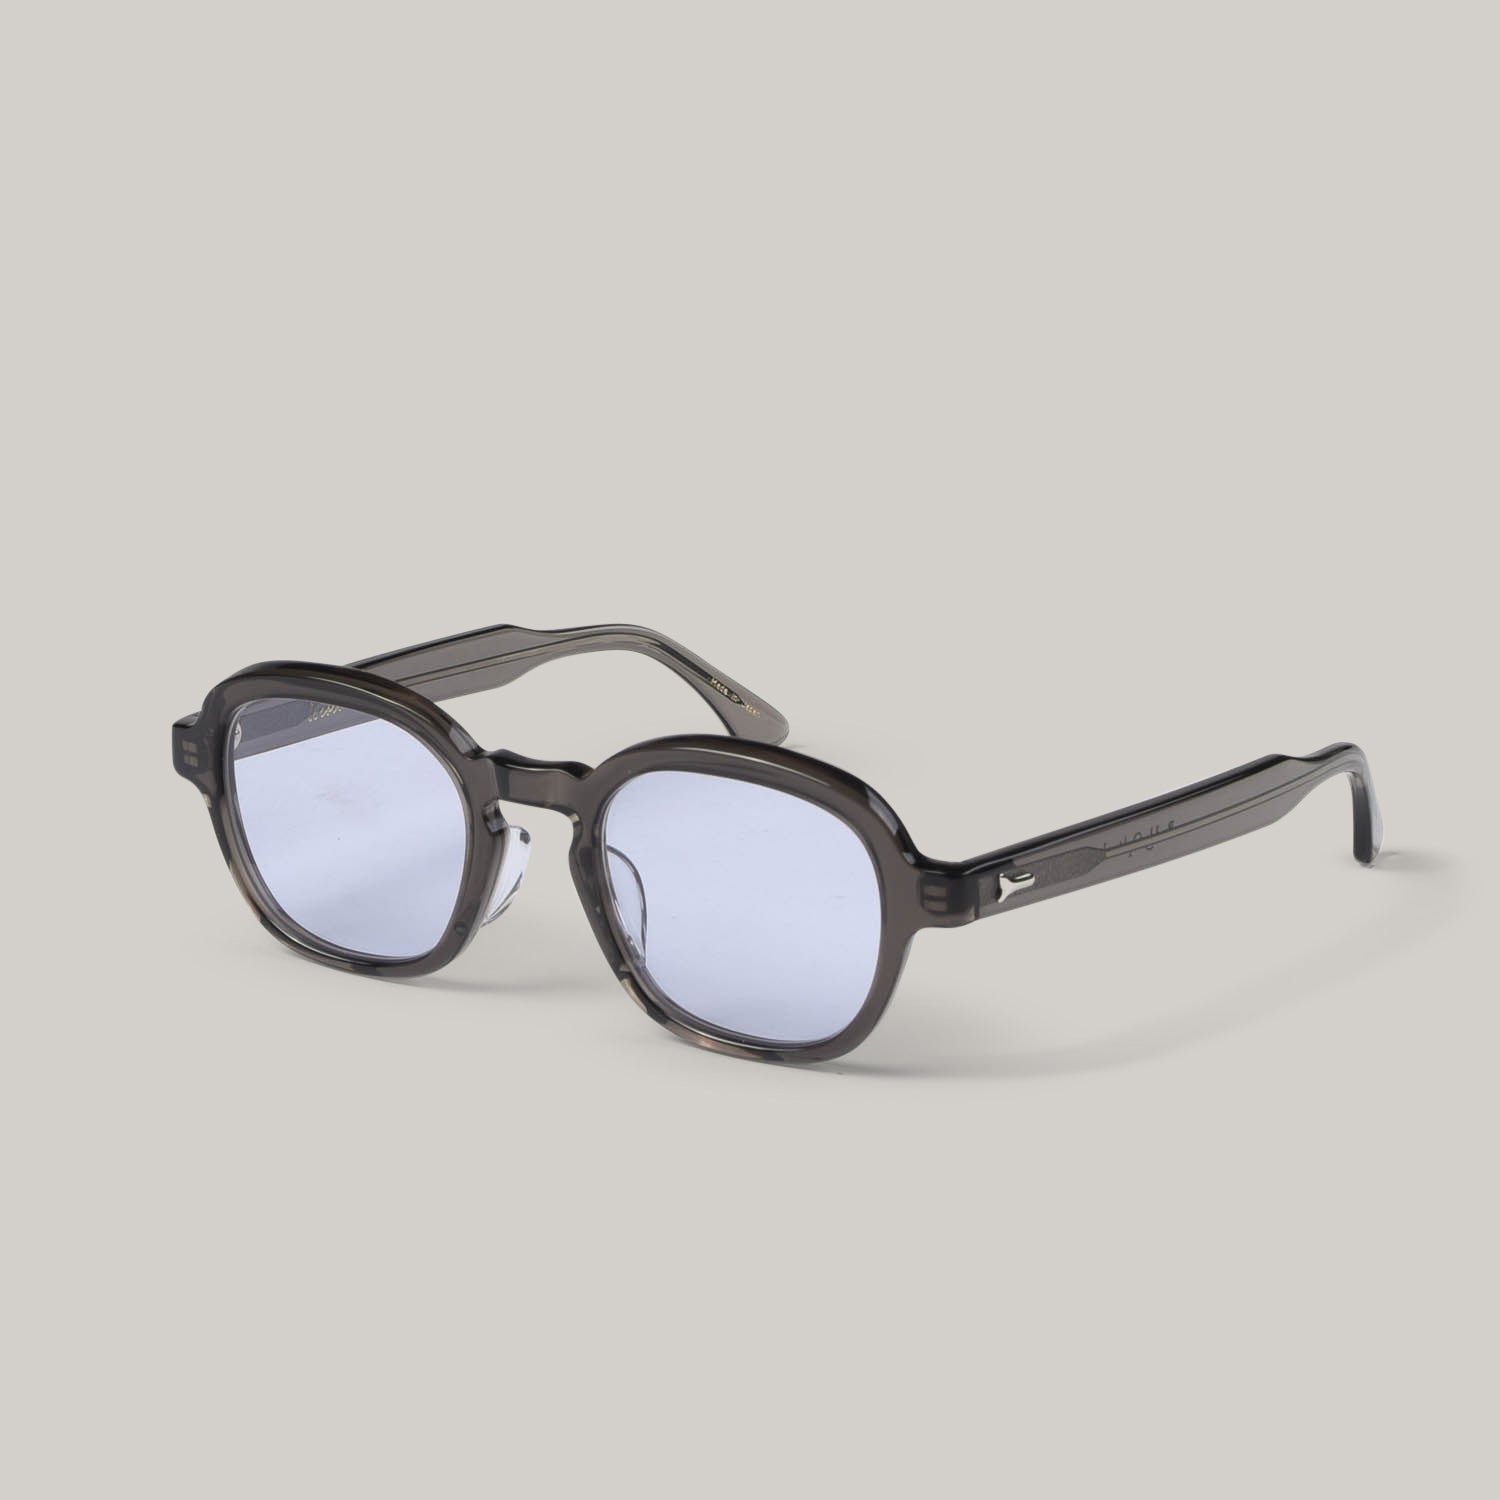 BUDDY OPTICAL WISCONSIN - GREY SMOKE – Pickings and Parry